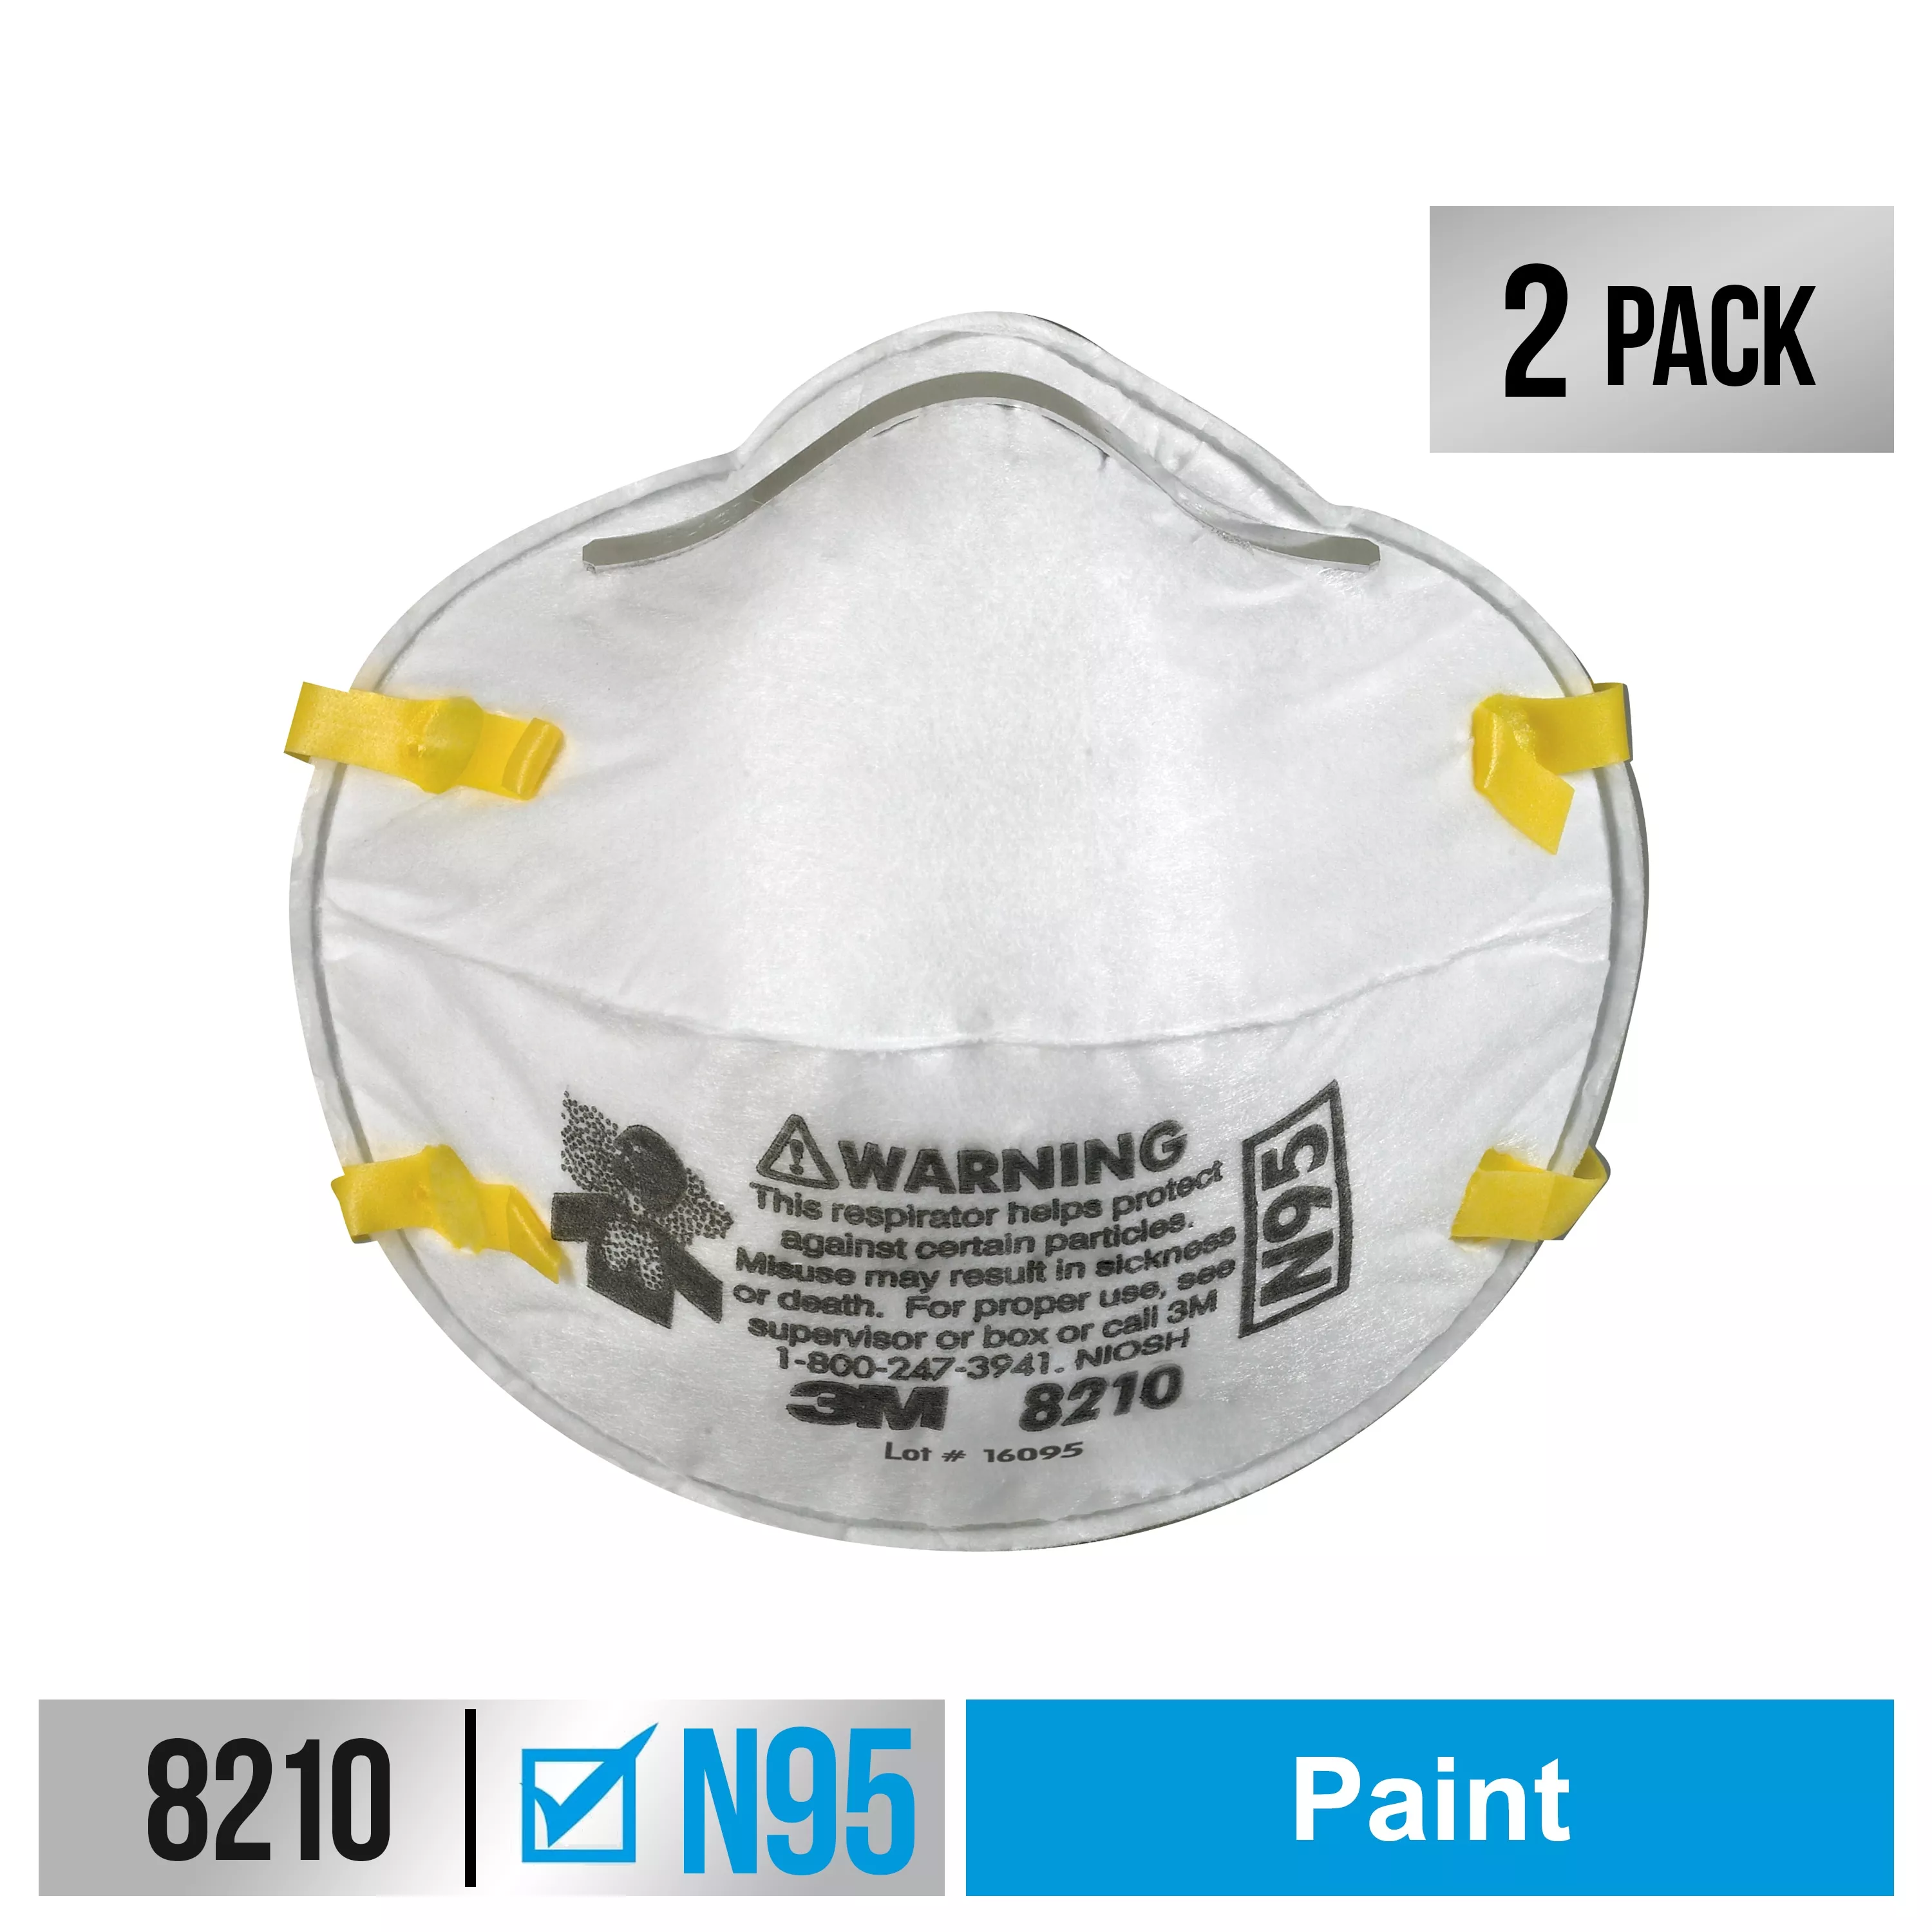 3M™ Performance Paint Prep Respirator N95 Particulate 8210P2-C, 2
eaches/pack, 6 packs/case